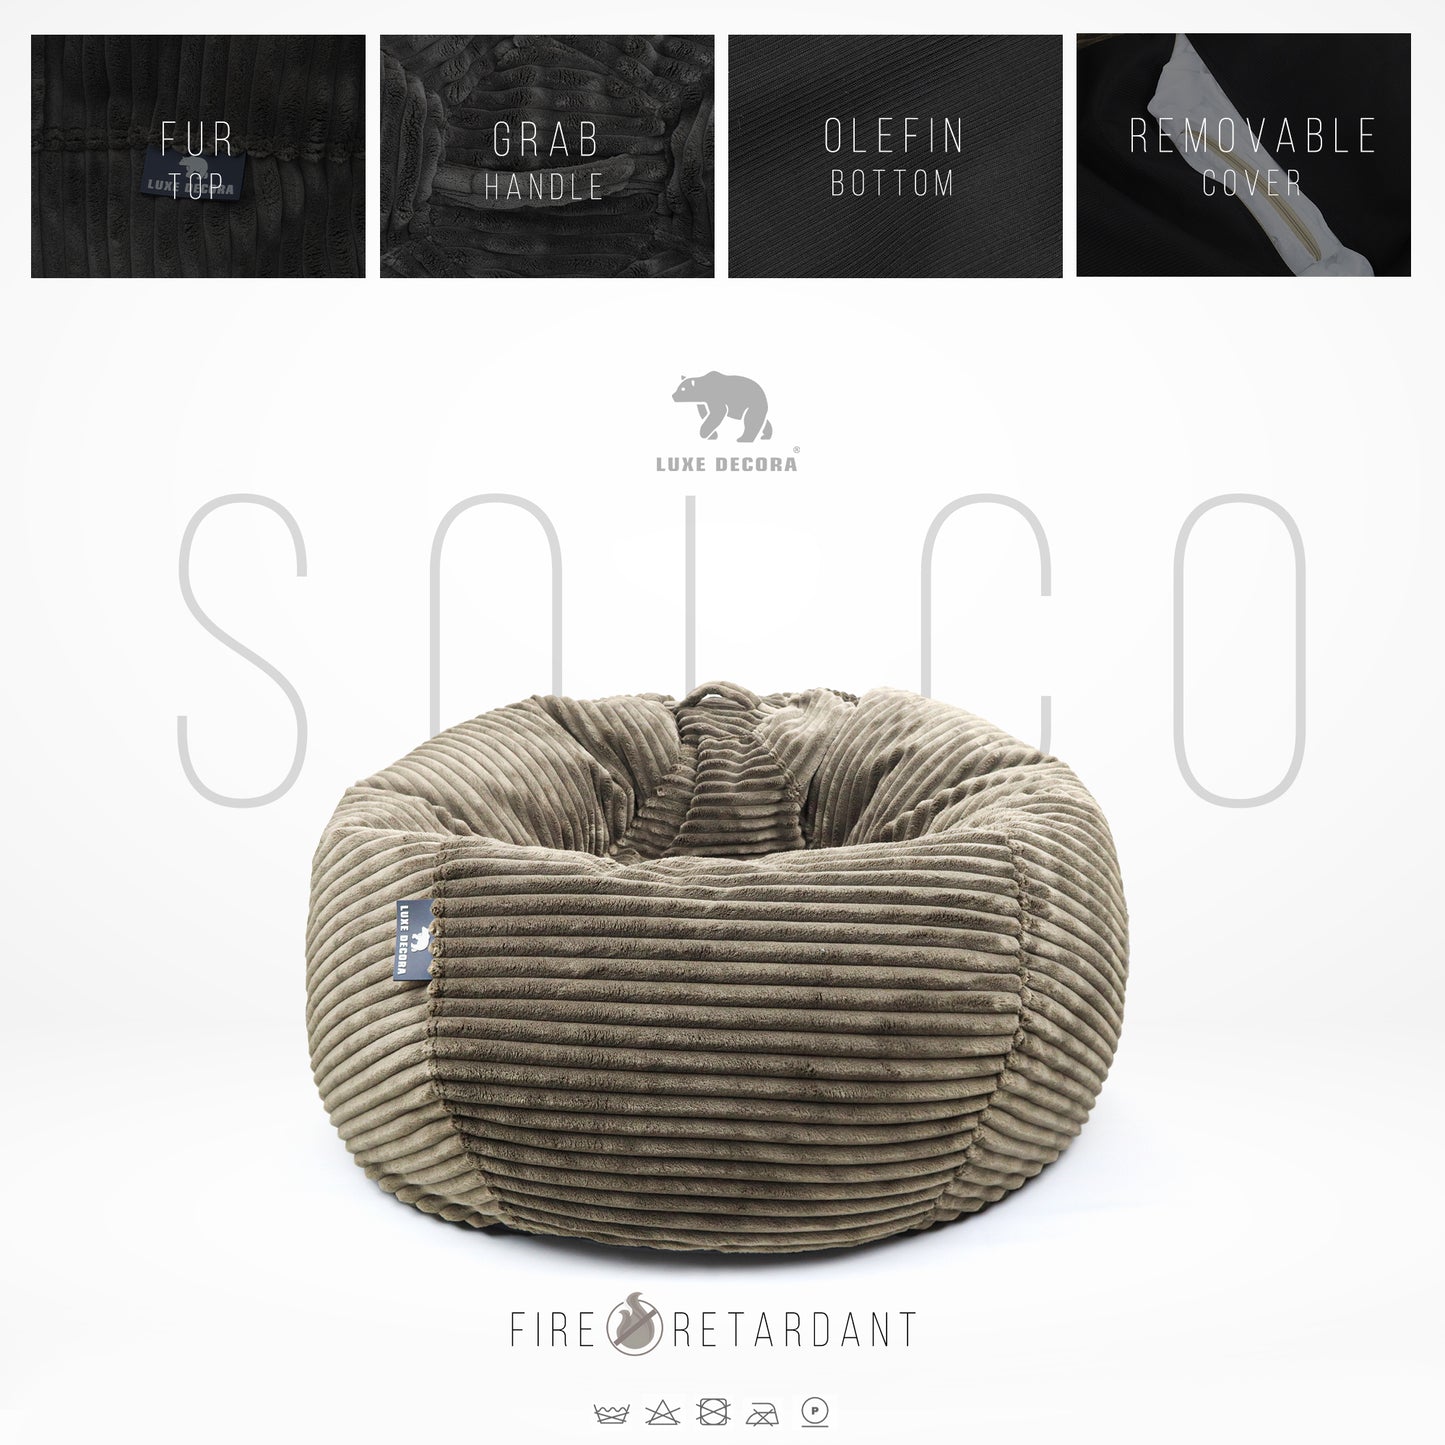 Solco - Channel Fur Bean Bag for Contemporary Comfort